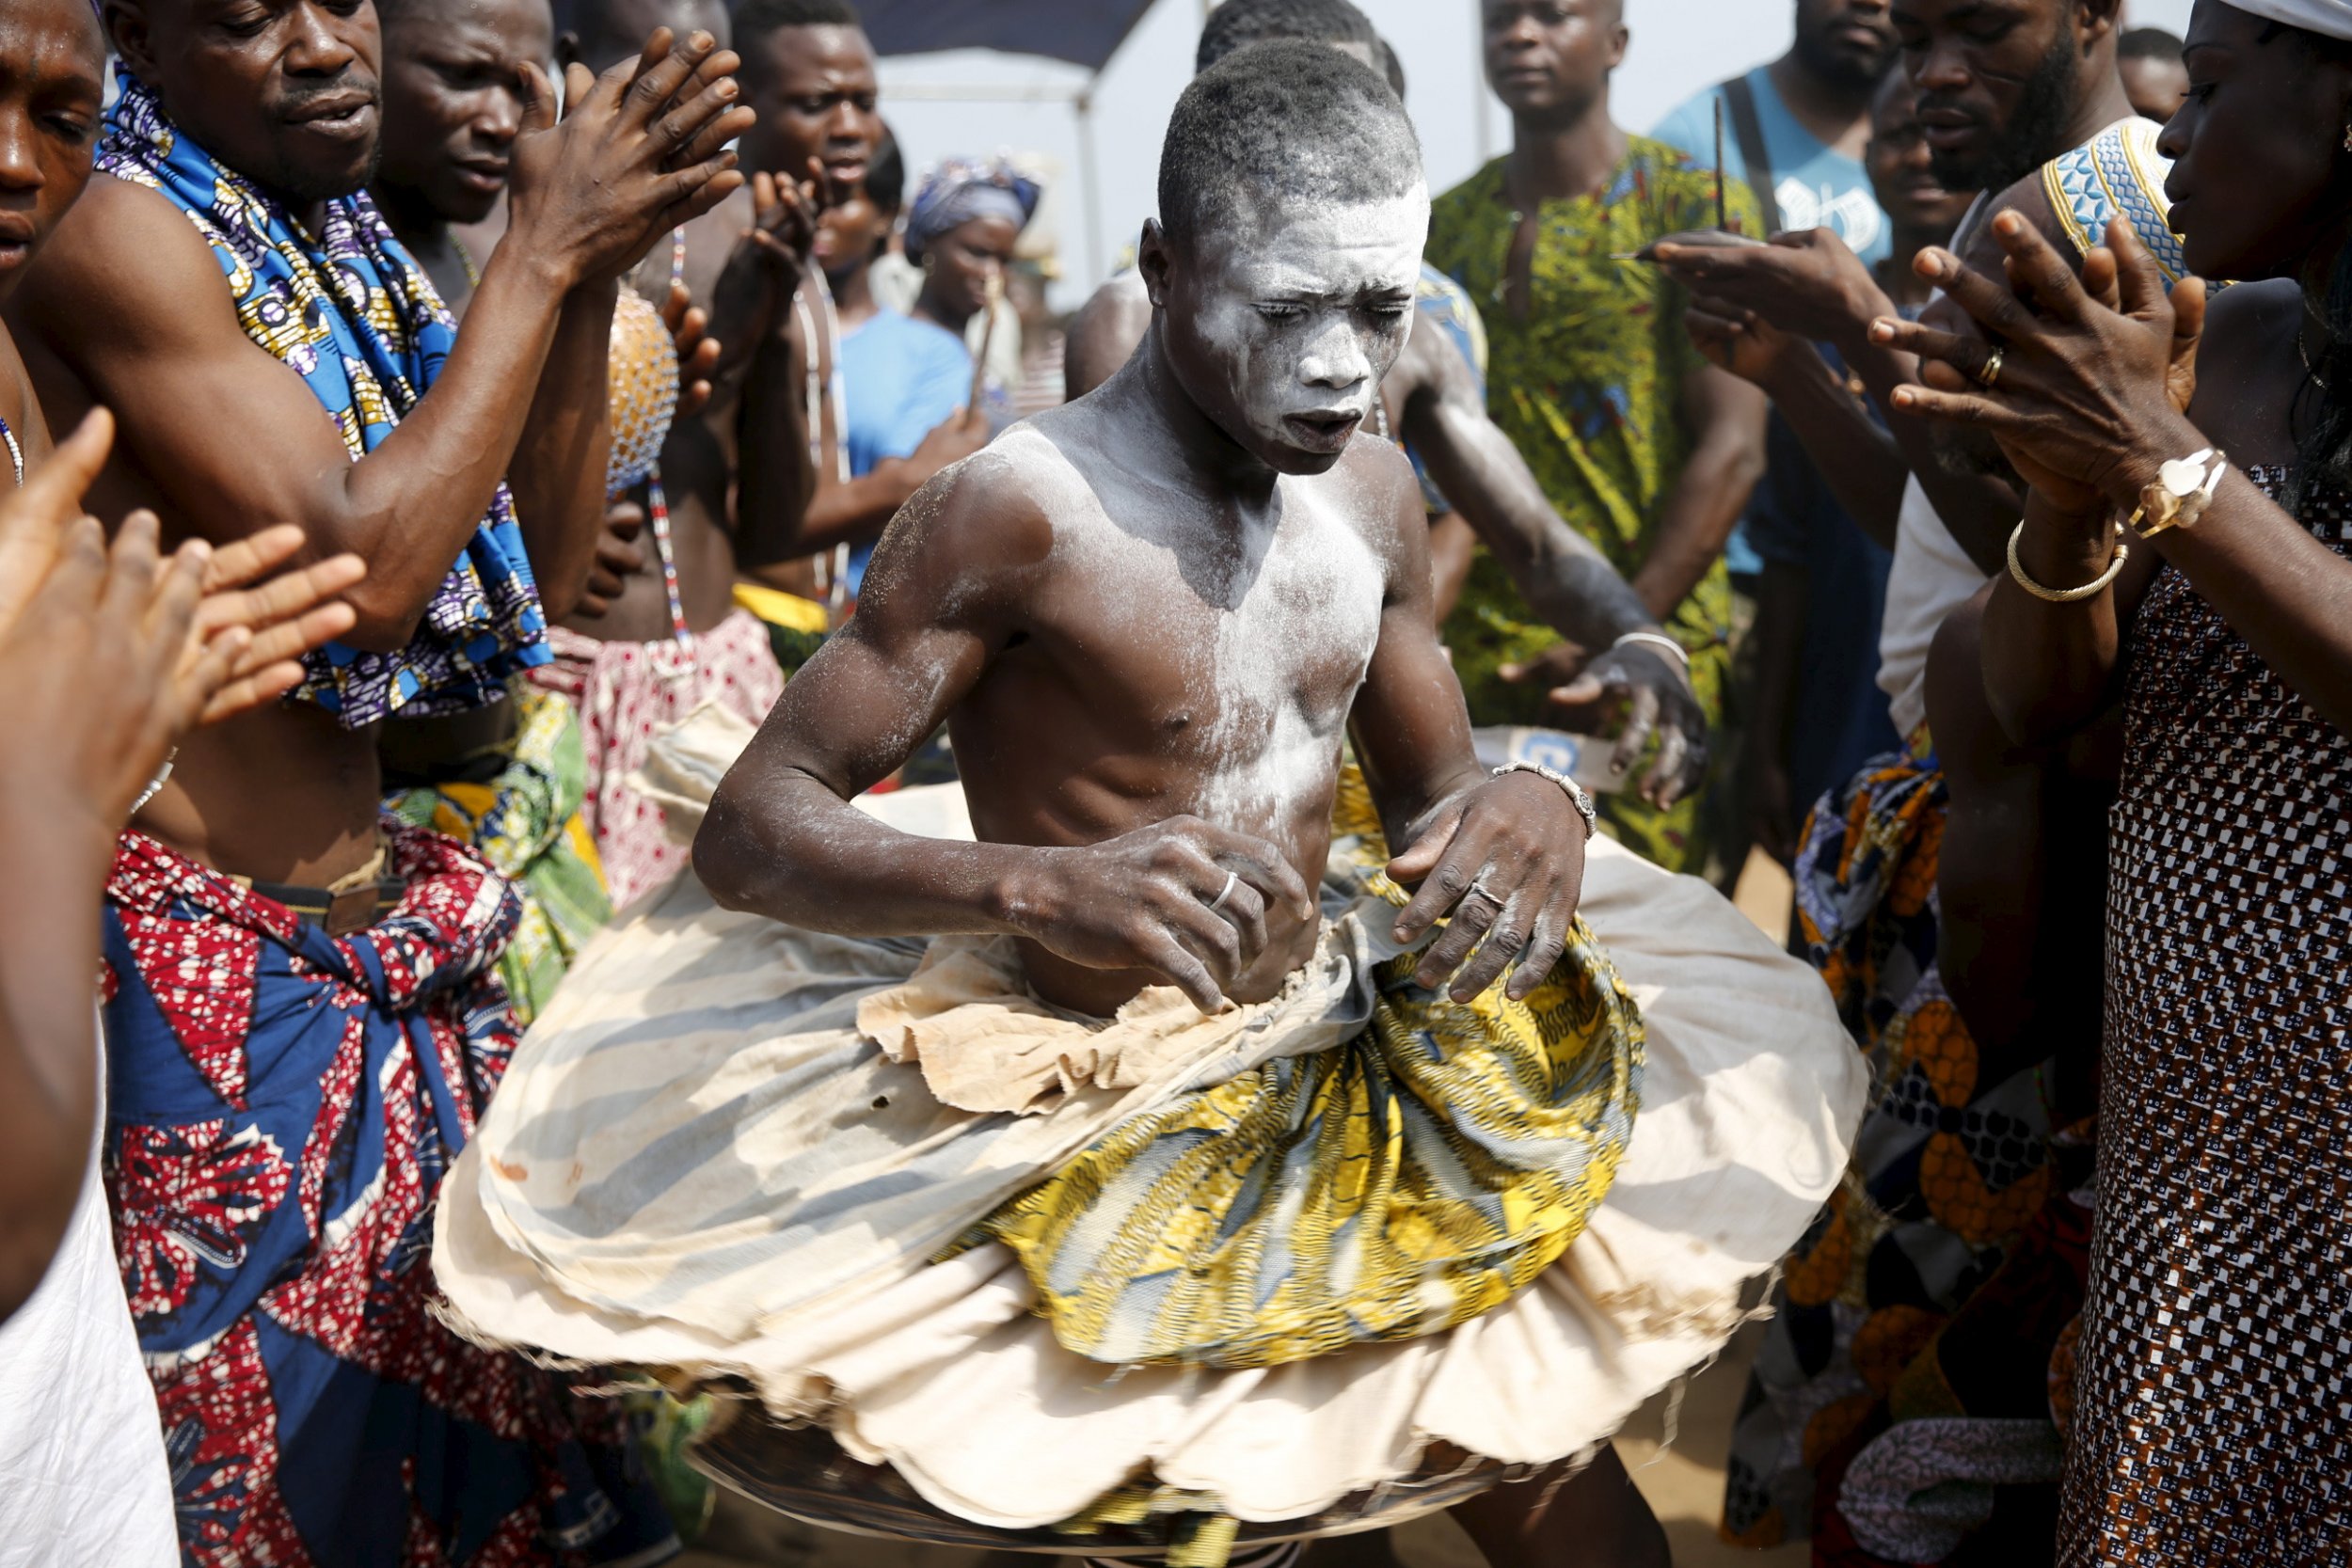 In Pictures: Benin Celebrates its Voodoo Holiday